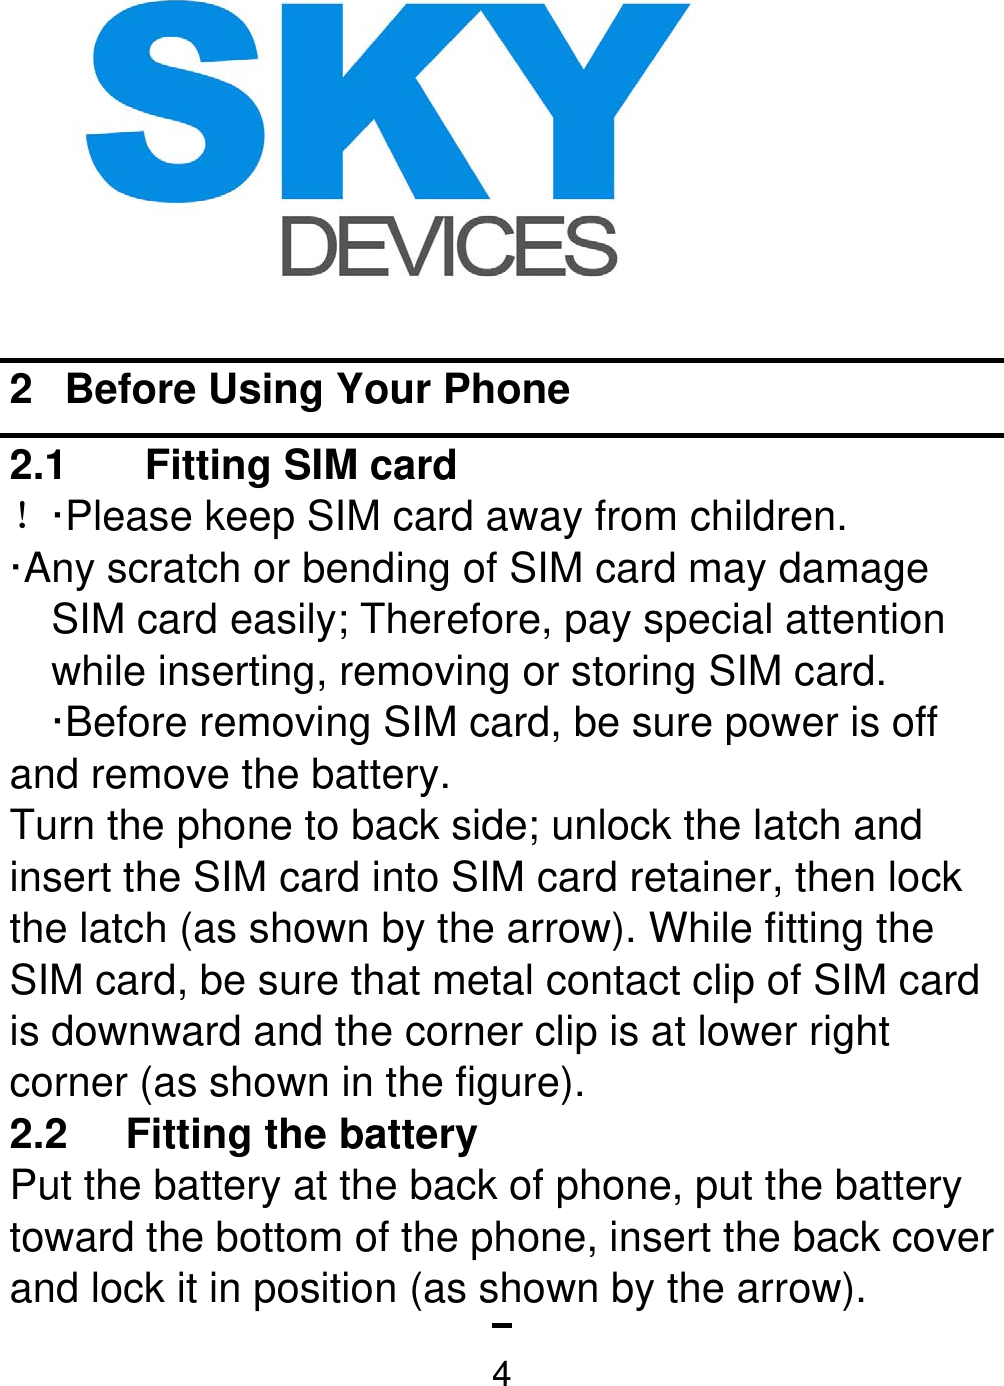   42  Before Using Your Phone 2.1  Fitting SIM card   ！·Please keep SIM card away from children. ·Any scratch or bending of SIM card may damage SIM card easily; Therefore, pay special attention while inserting, removing or storing SIM card. ·Before removing SIM card, be sure power is off and remove the battery. Turn the phone to back side; unlock the latch and insert the SIM card into SIM card retainer, then lock the latch (as shown by the arrow). While fitting the SIM card, be sure that metal contact clip of SIM card is downward and the corner clip is at lower right corner (as shown in the figure).   2.2  Fitting the battery   Put the battery at the back of phone, put the battery toward the bottom of the phone, insert the back cover and lock it in position (as shown by the arrow).   